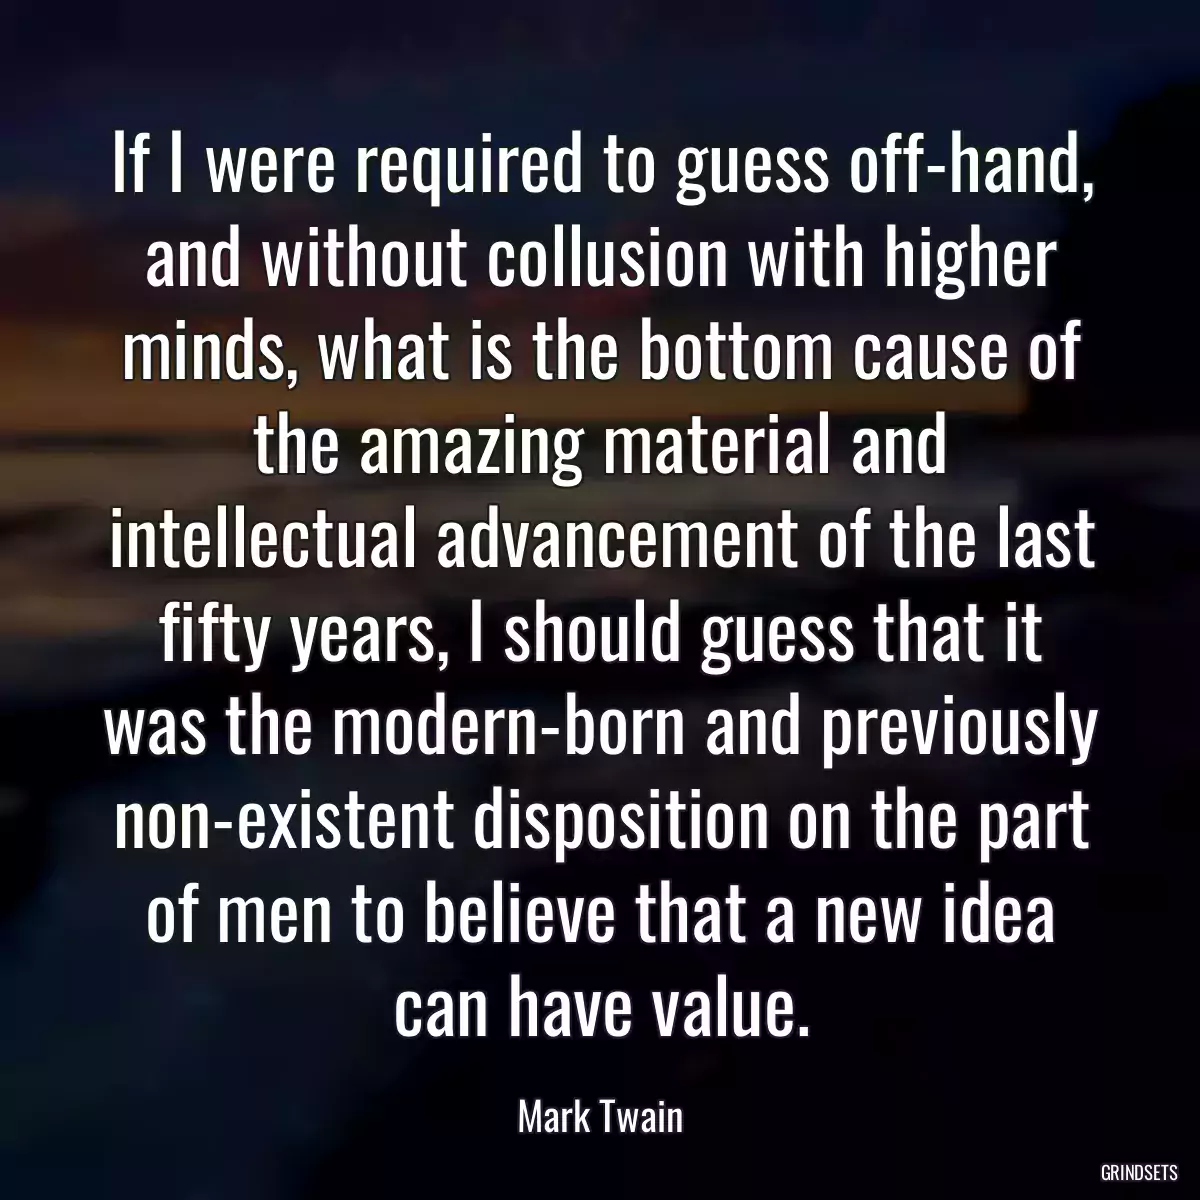 If I were required to guess off-hand, and without collusion with higher minds, what is the bottom cause of the amazing material and intellectual advancement of the last fifty years, I should guess that it was the modern-born and previously non-existent disposition on the part of men to believe that a new idea can have value.